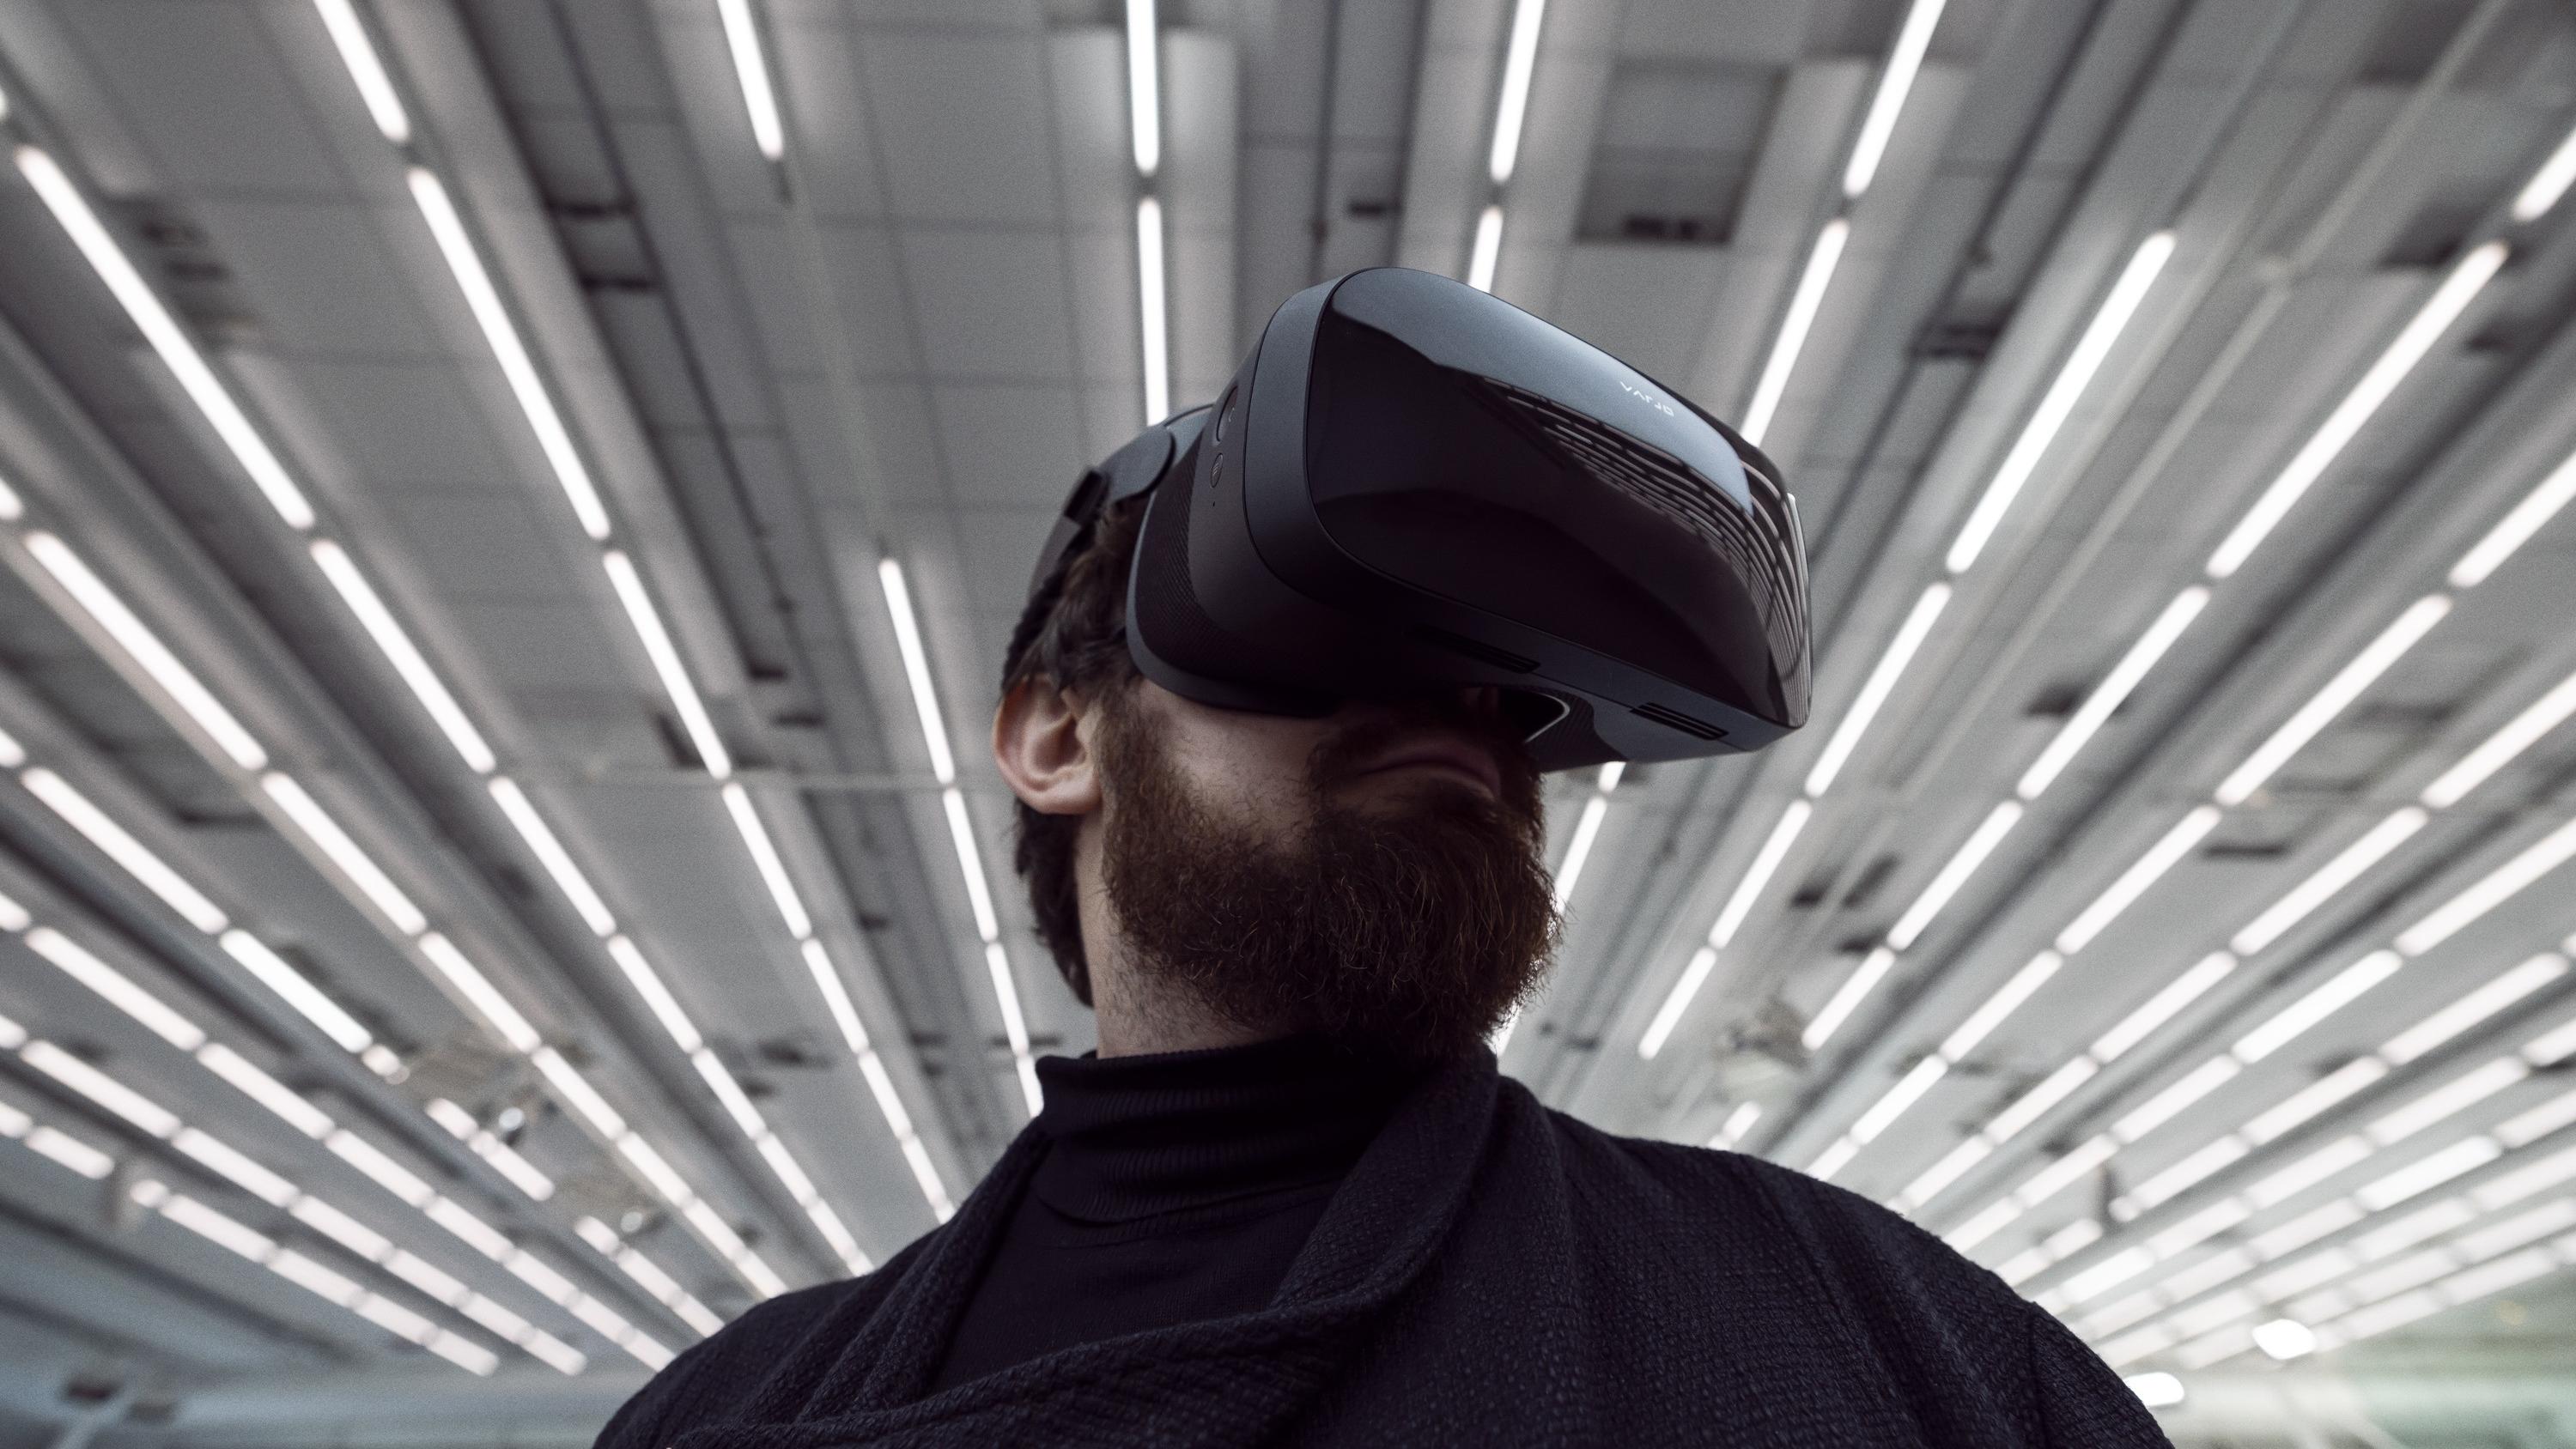 Person wearing a mixed reality headset. The background is industrial tube lighting on the ceiling. The image shows the person from the shoulders up.